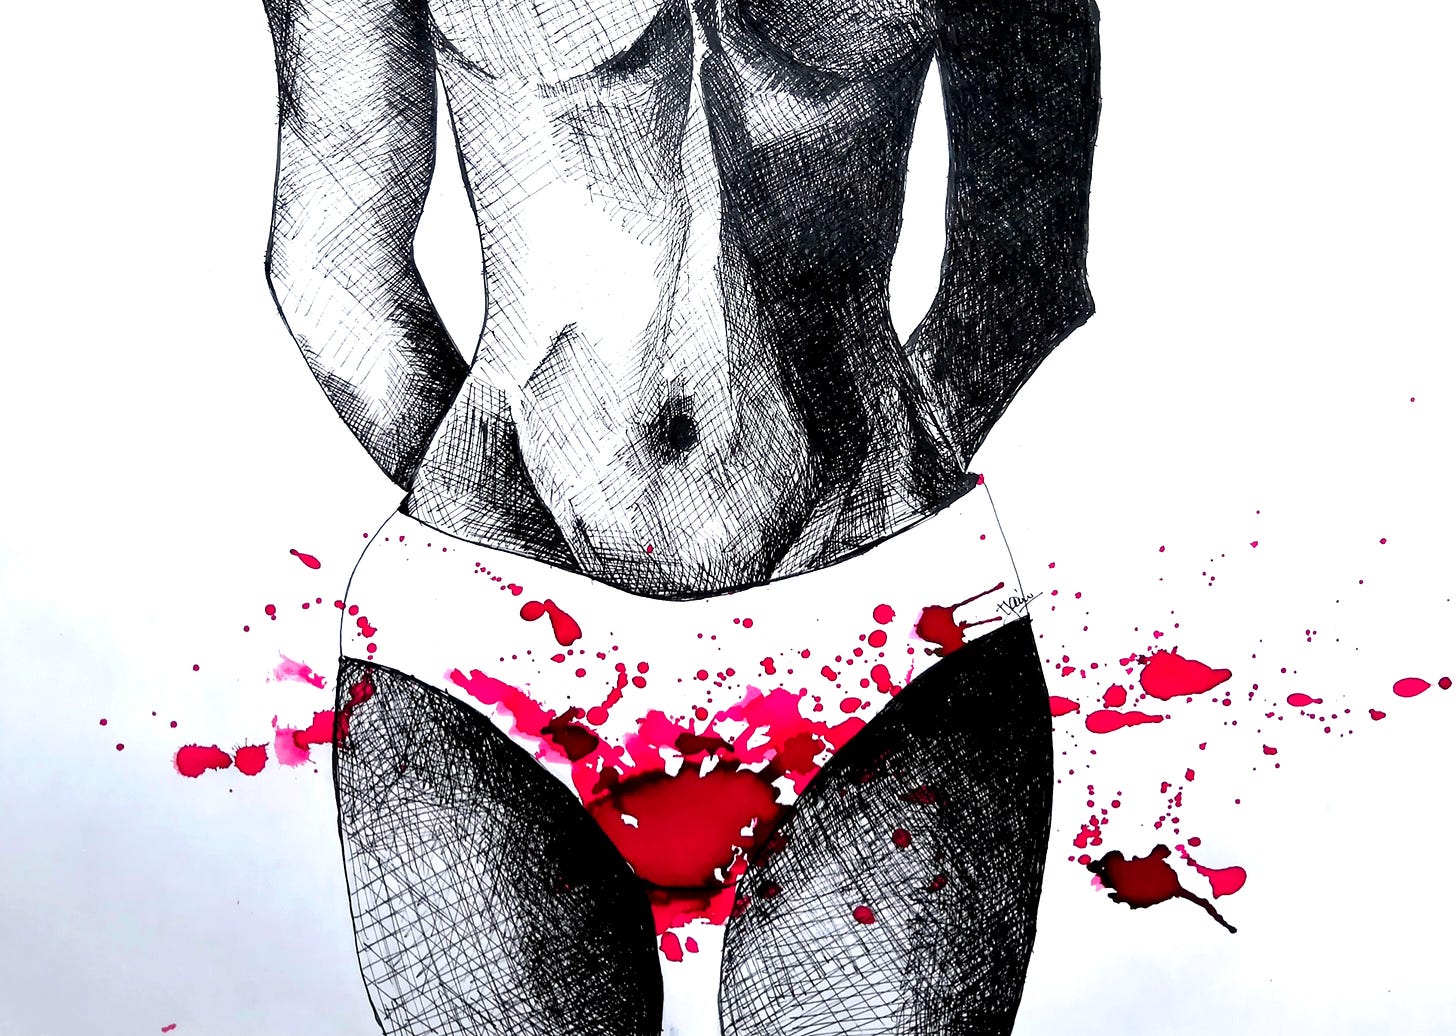 sketch drawing of a woman's torso wearing white panties and splashed with red paint